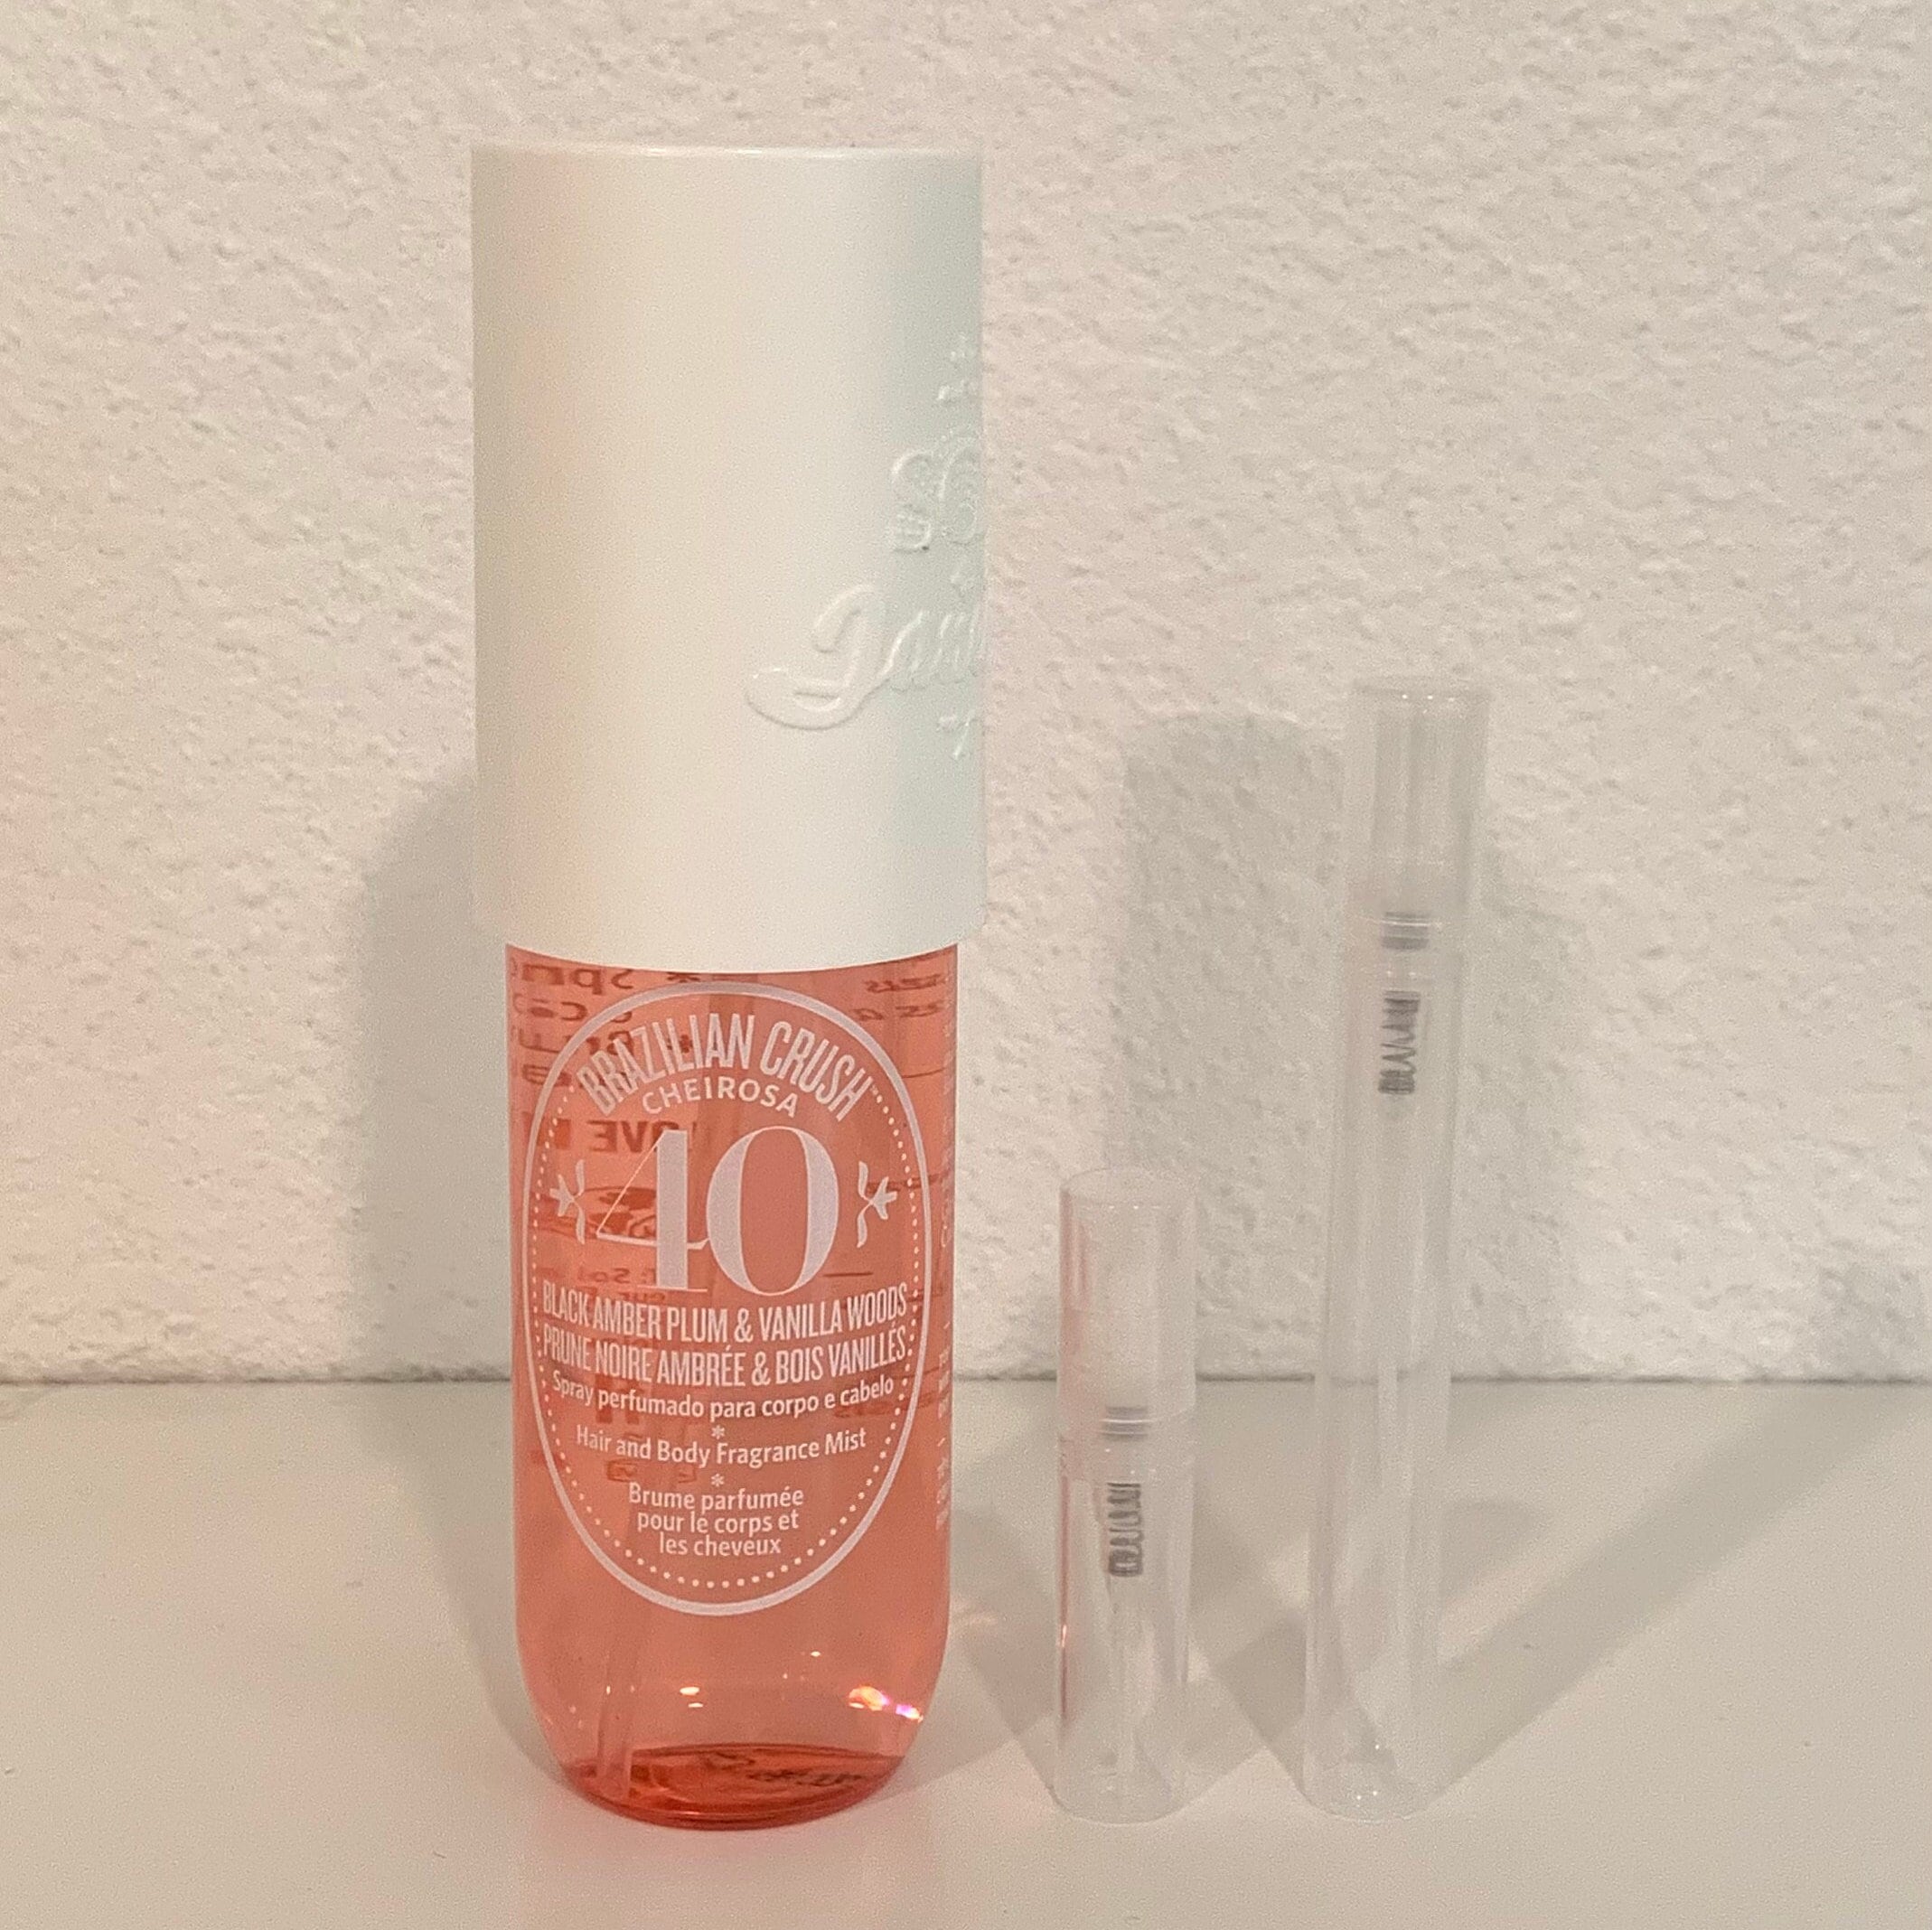 Rio Radiance Hair & Body Fragrance Mist Full Size and Travel Size Set